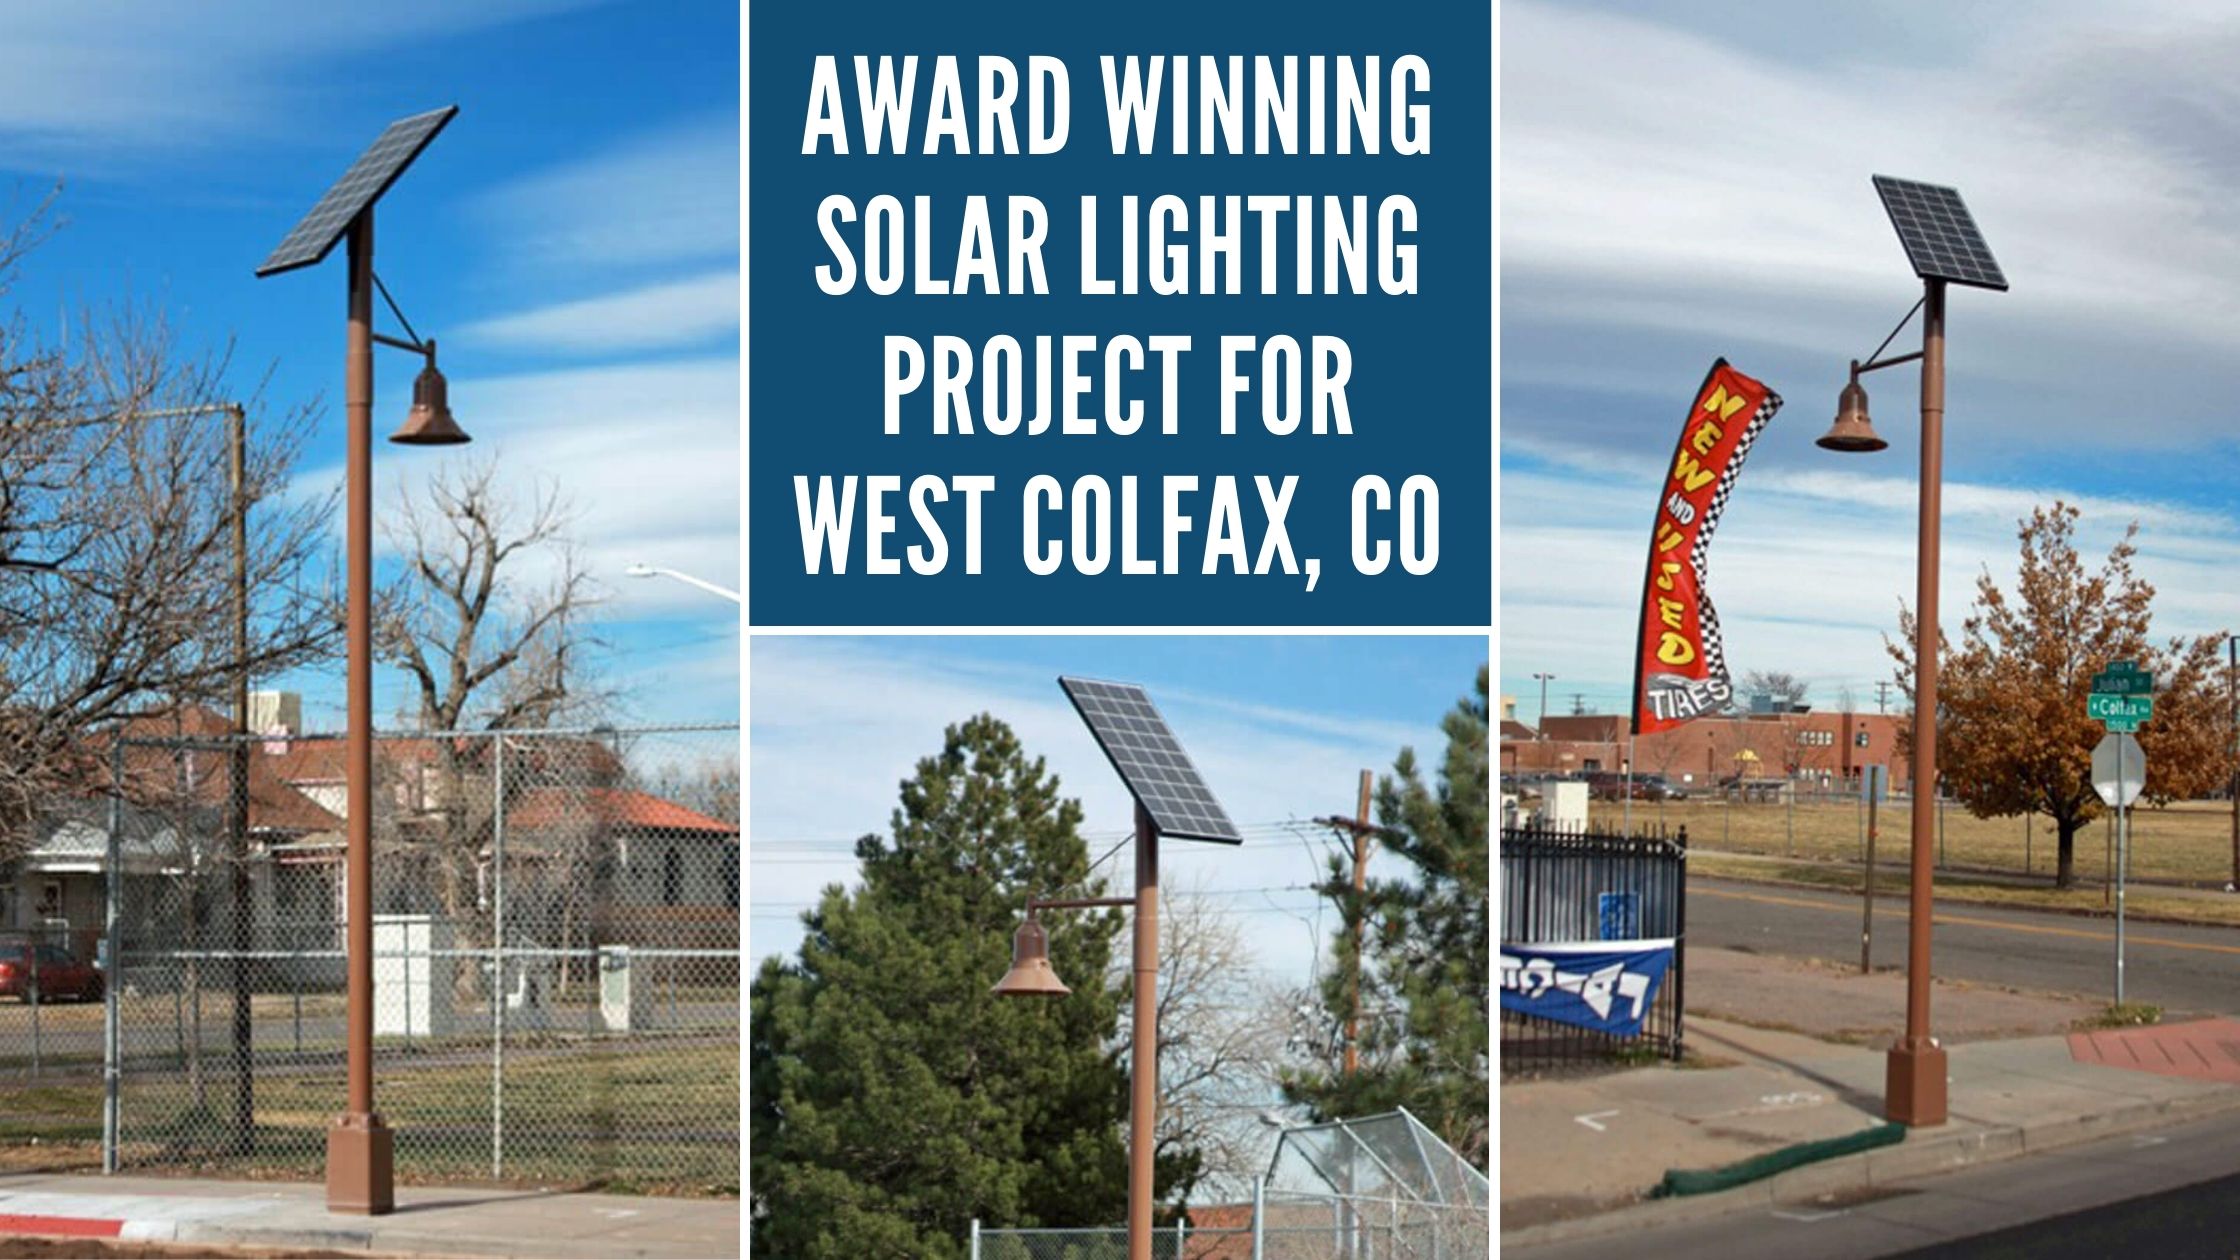 Award Winning Solar Lighting Project for West Colfax, CO